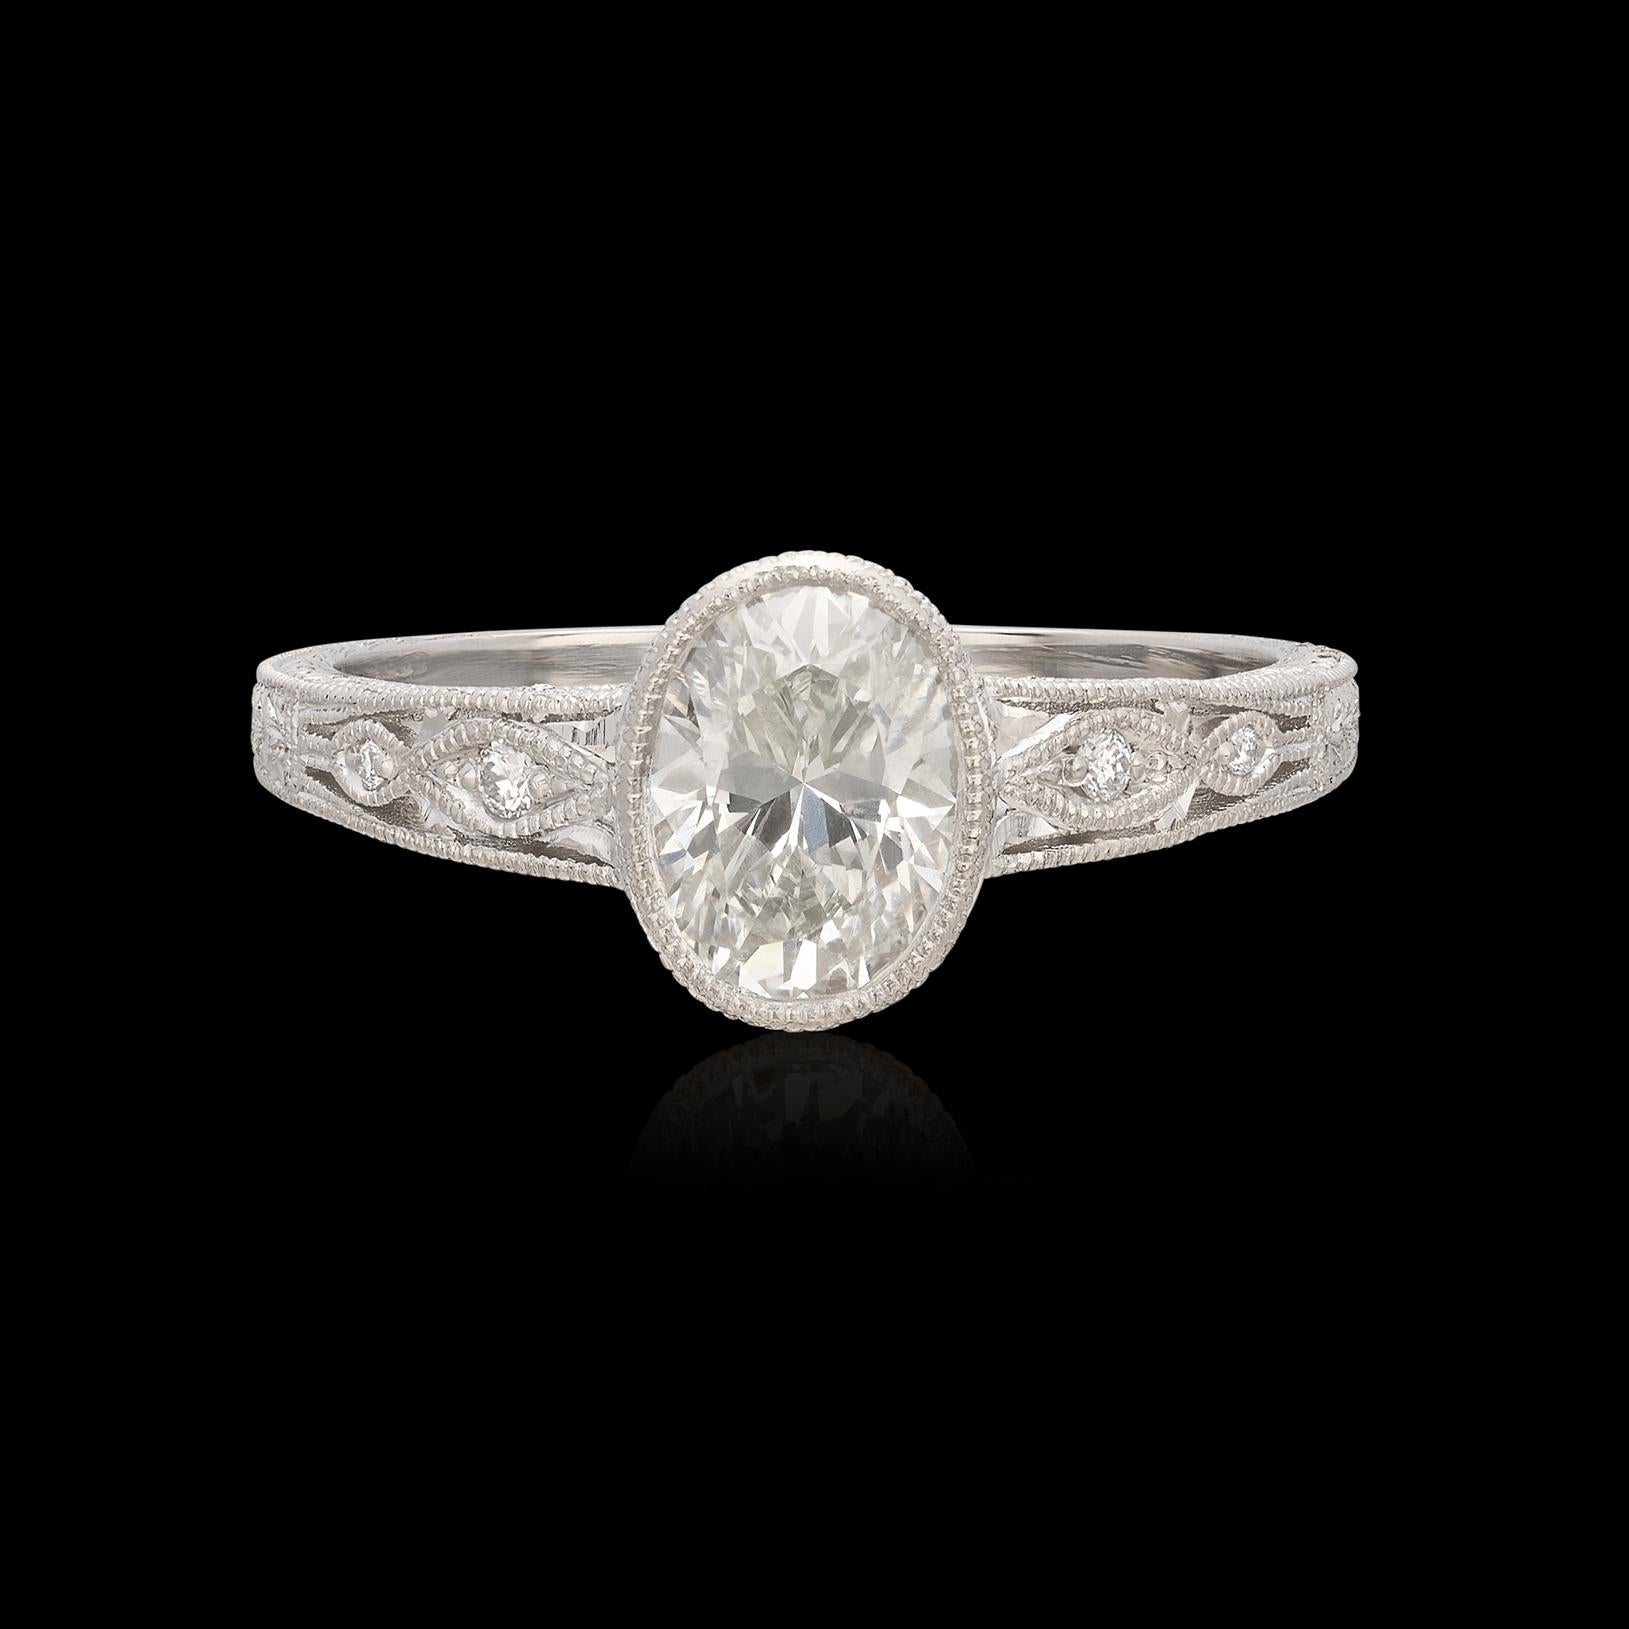 Gorgeous custom Platinum ring features a 0.99 carat oval diamond bezel set in a delicate design featuring expert milgrain, filigree and hand engraving. The center stone has been graded as I color and SI clarity, delivering plenty sparkle and fire.